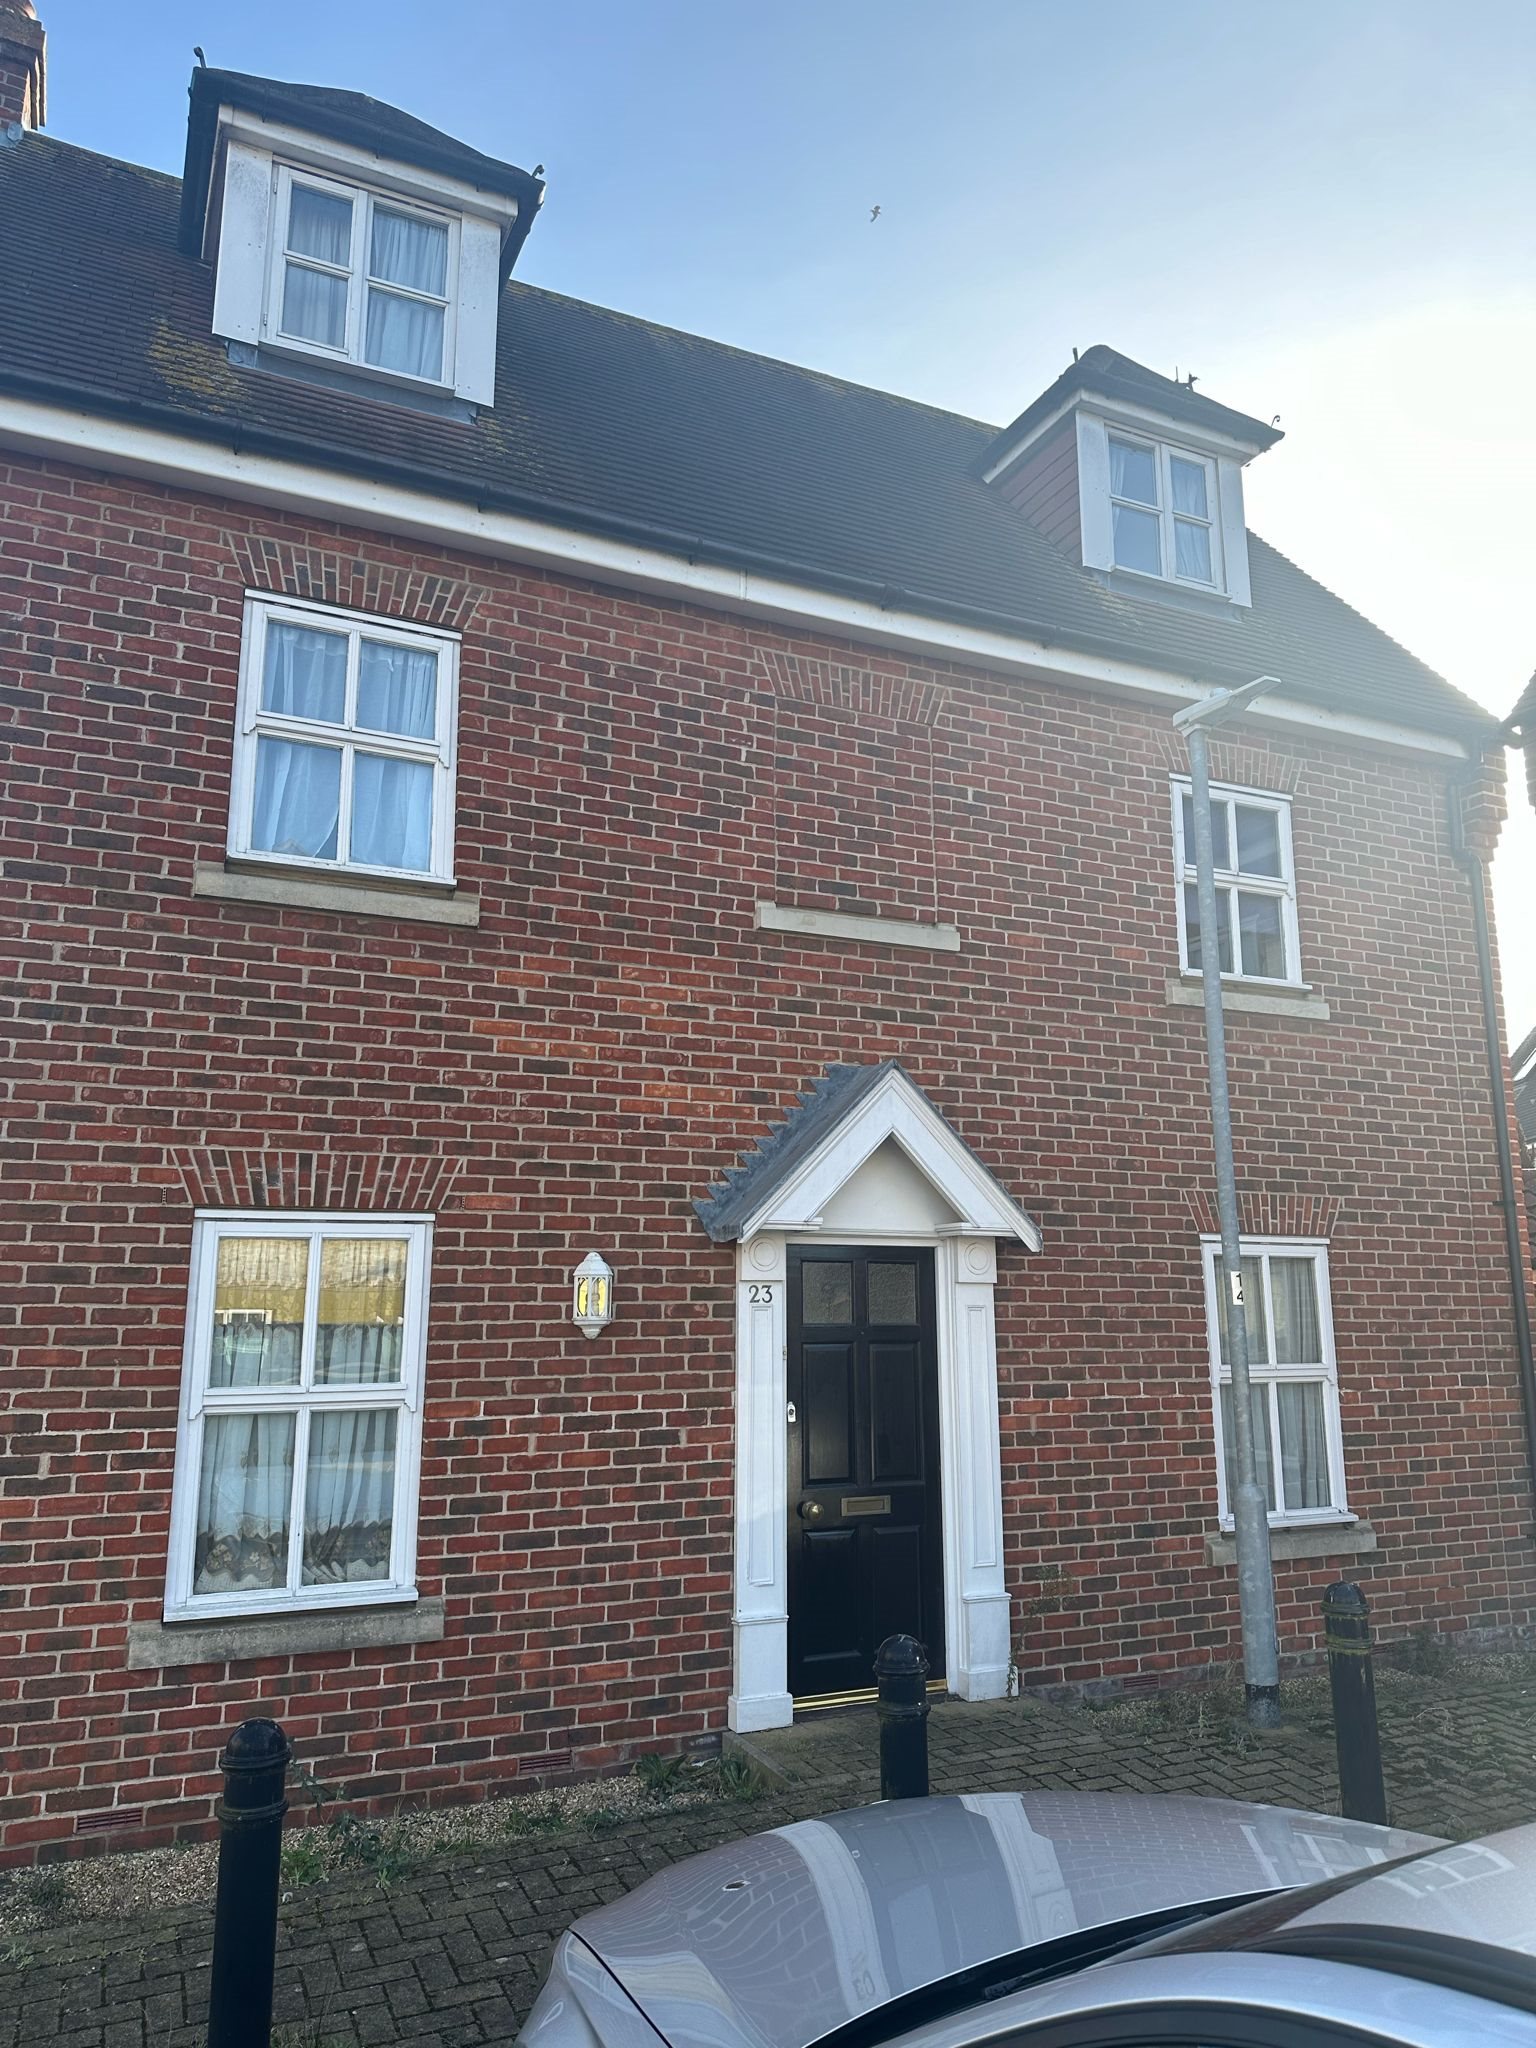 5 bed house to rent in Mascot Square, Hythe, CO4 